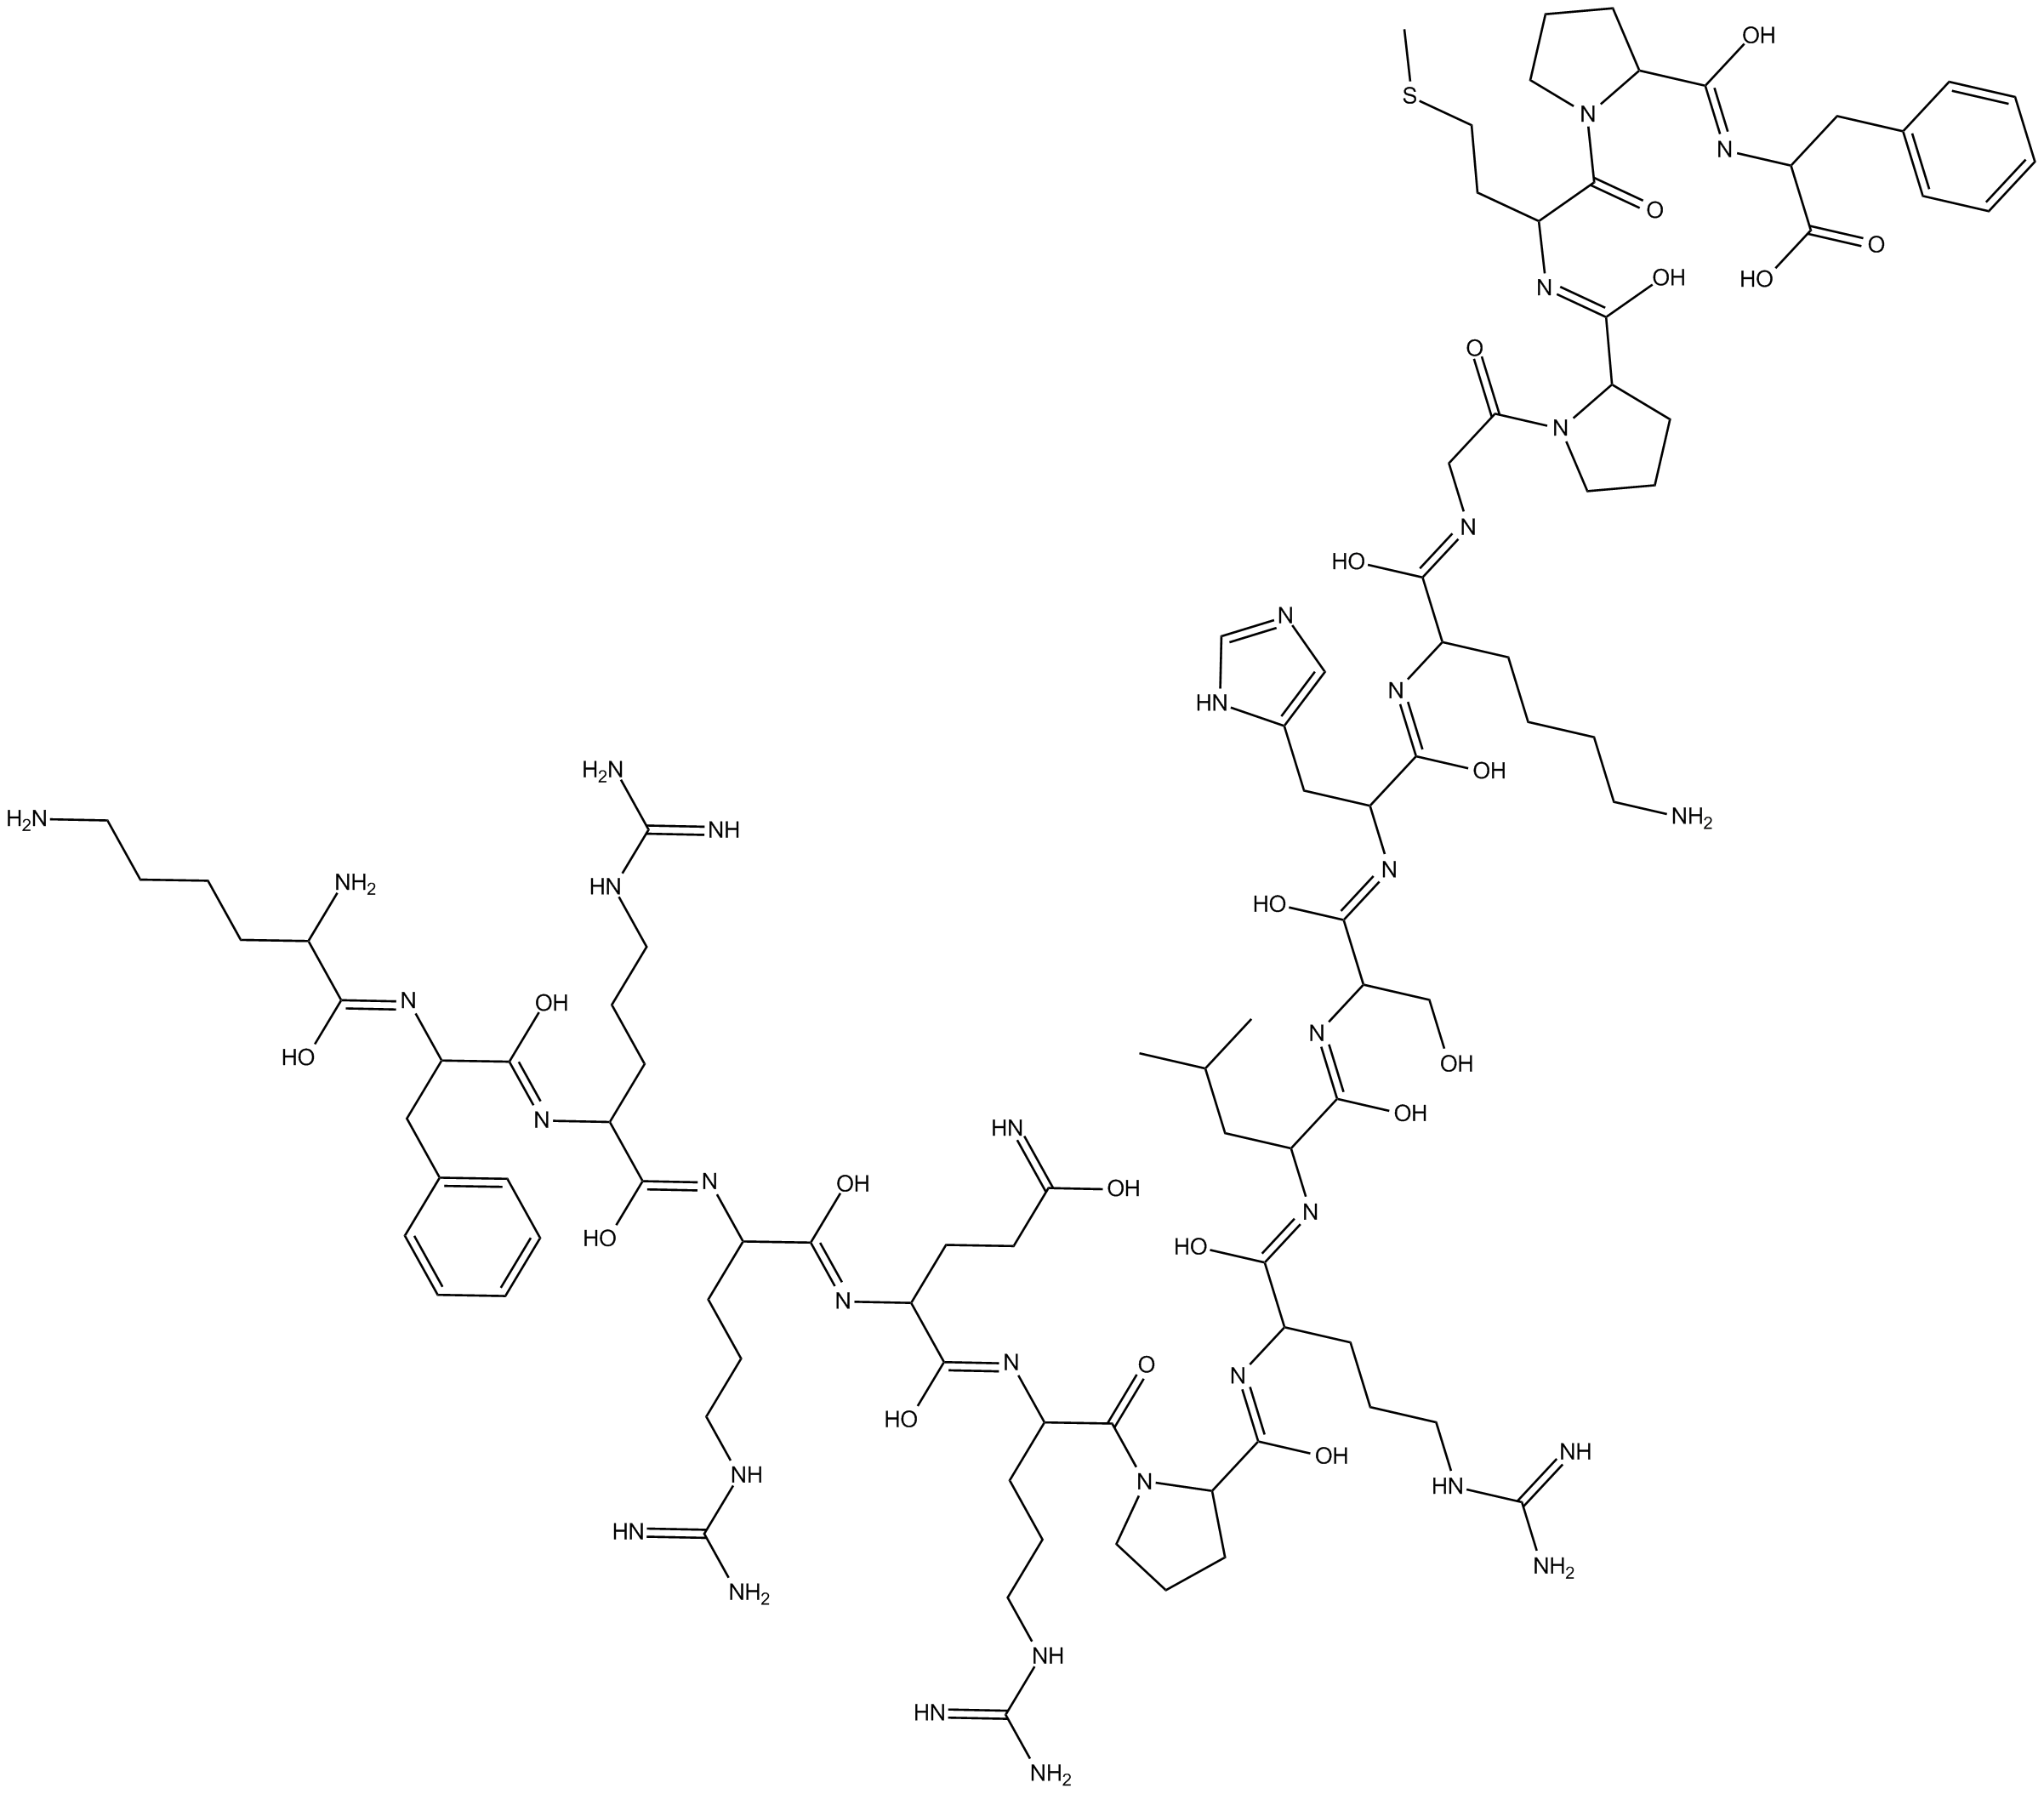 Apelin-17 (human, bovine)  Chemical Structure